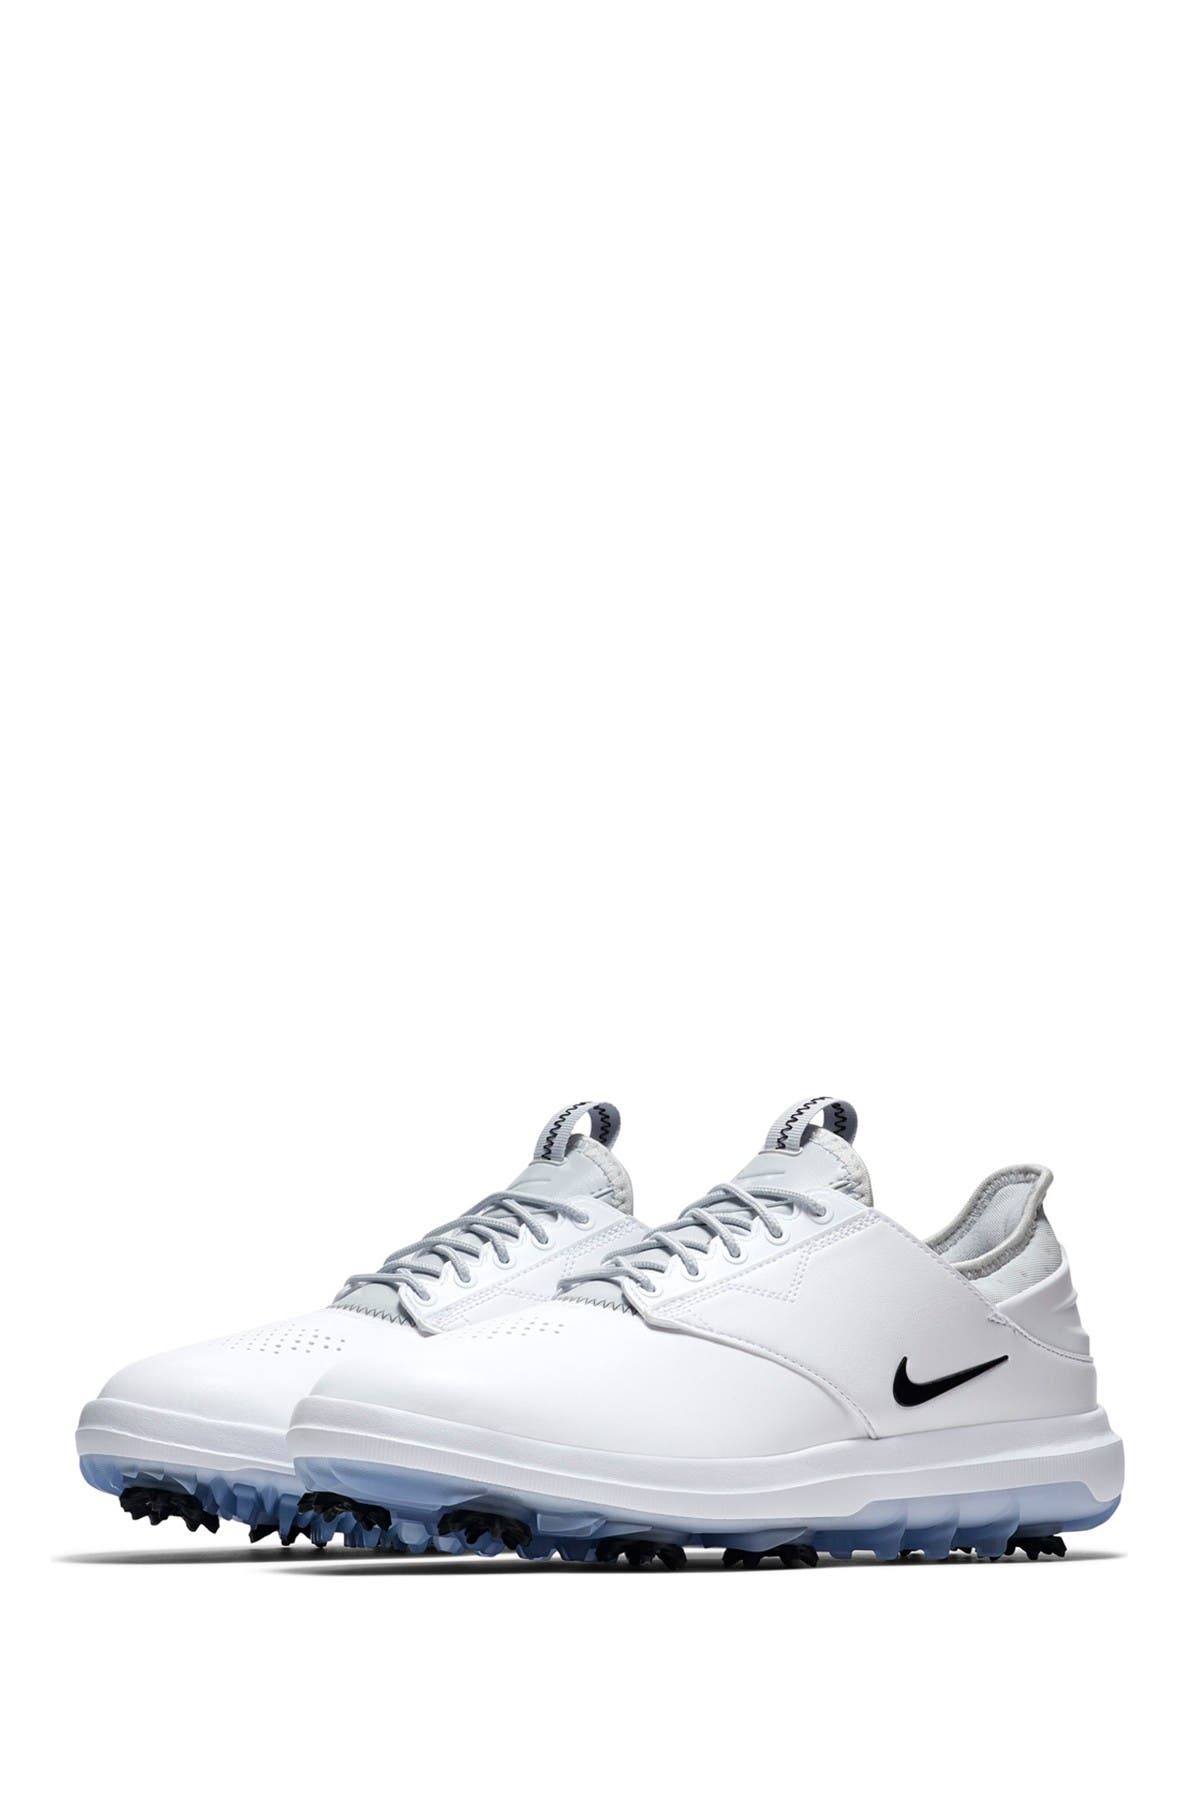 nike mens air zoom direct golf shoes